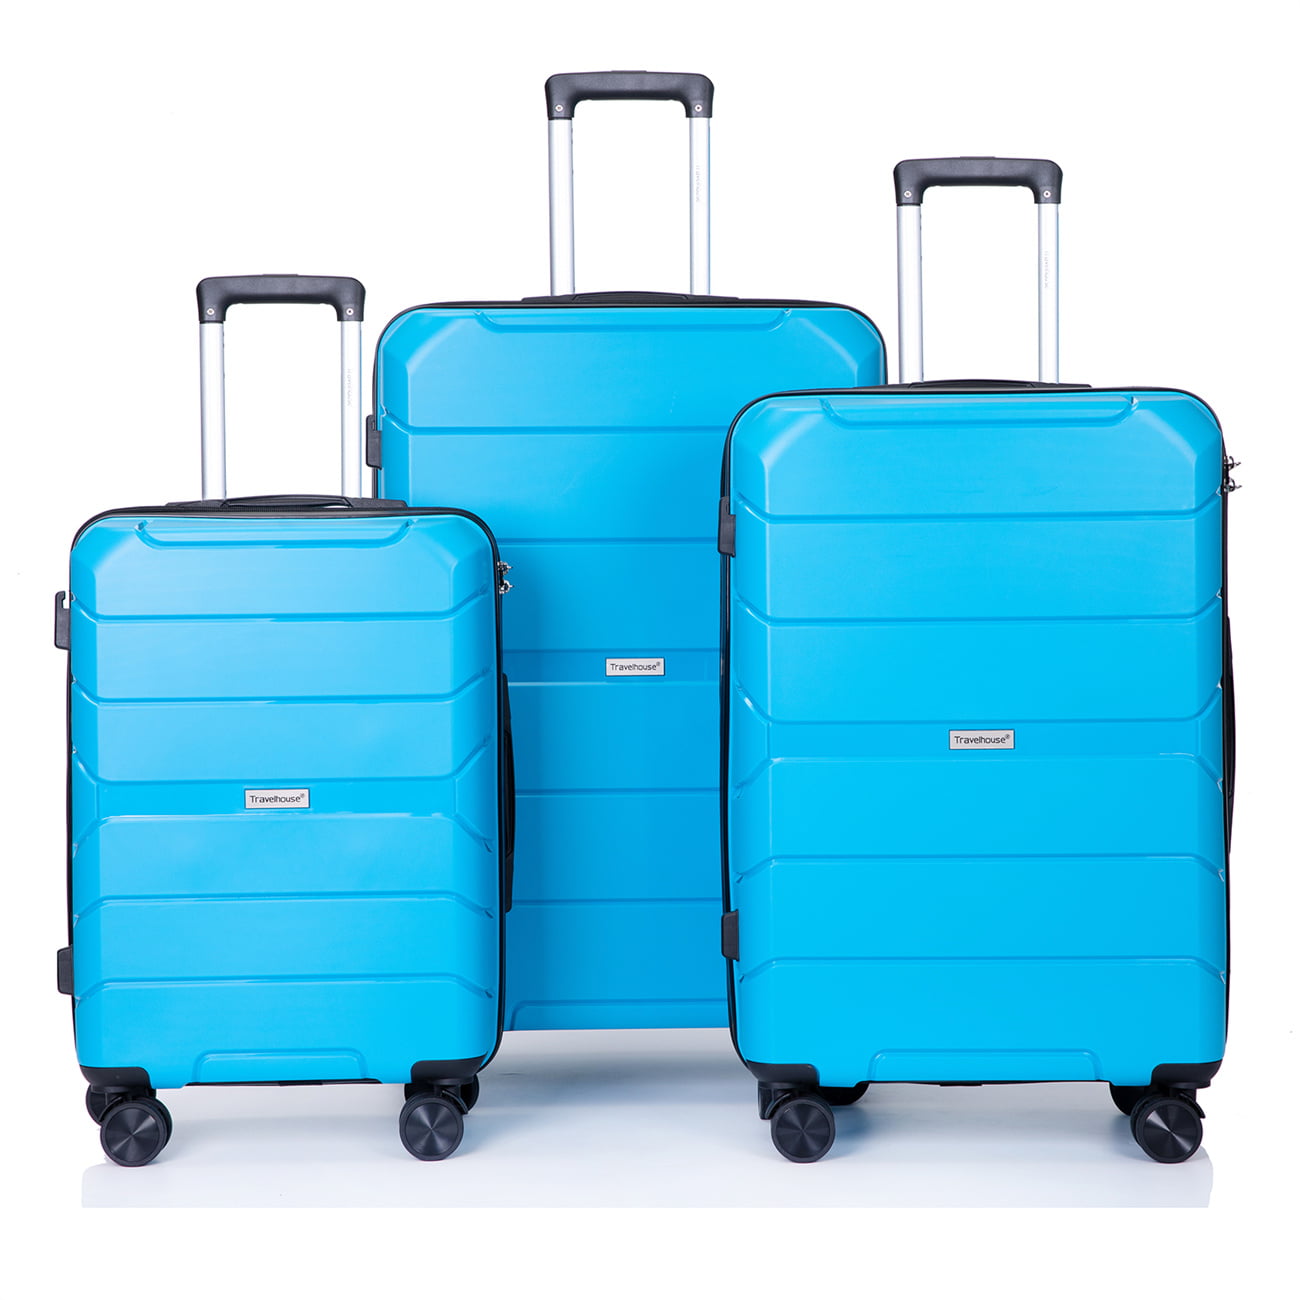 kop Nauwkeurig kook een maaltijd Luggage 3 Piece Sets, 100% PP Hardshell Suitcase, Lightweight Spinner  Wheels Luggage Sets, Durable Travel Luggage Bags with TSA Lock, Upright  Carry-on Suitcases 20in/24in/28in, Light Blue - Walmart.com